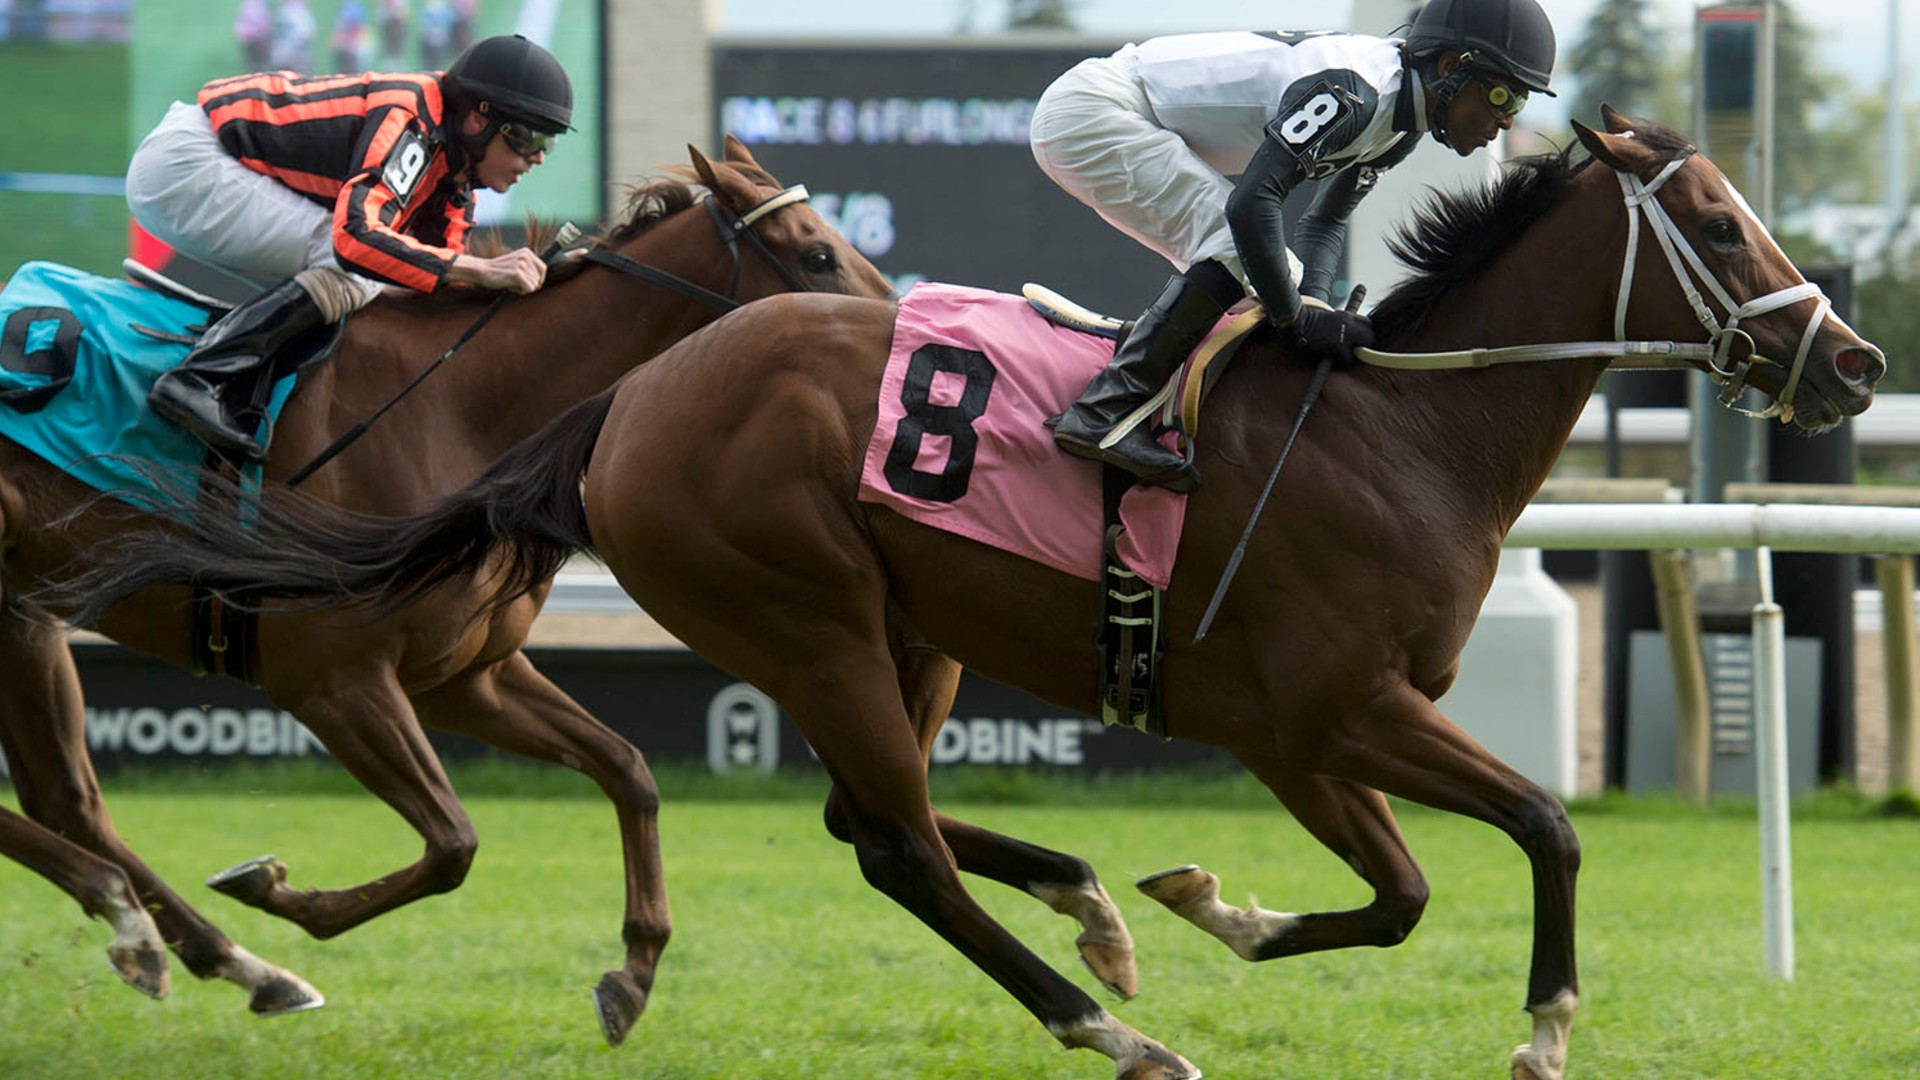 Thumbnail for Woodbine Saturday Preview: Sanity Tries to Step up in Grade 3 Ontario Fashion